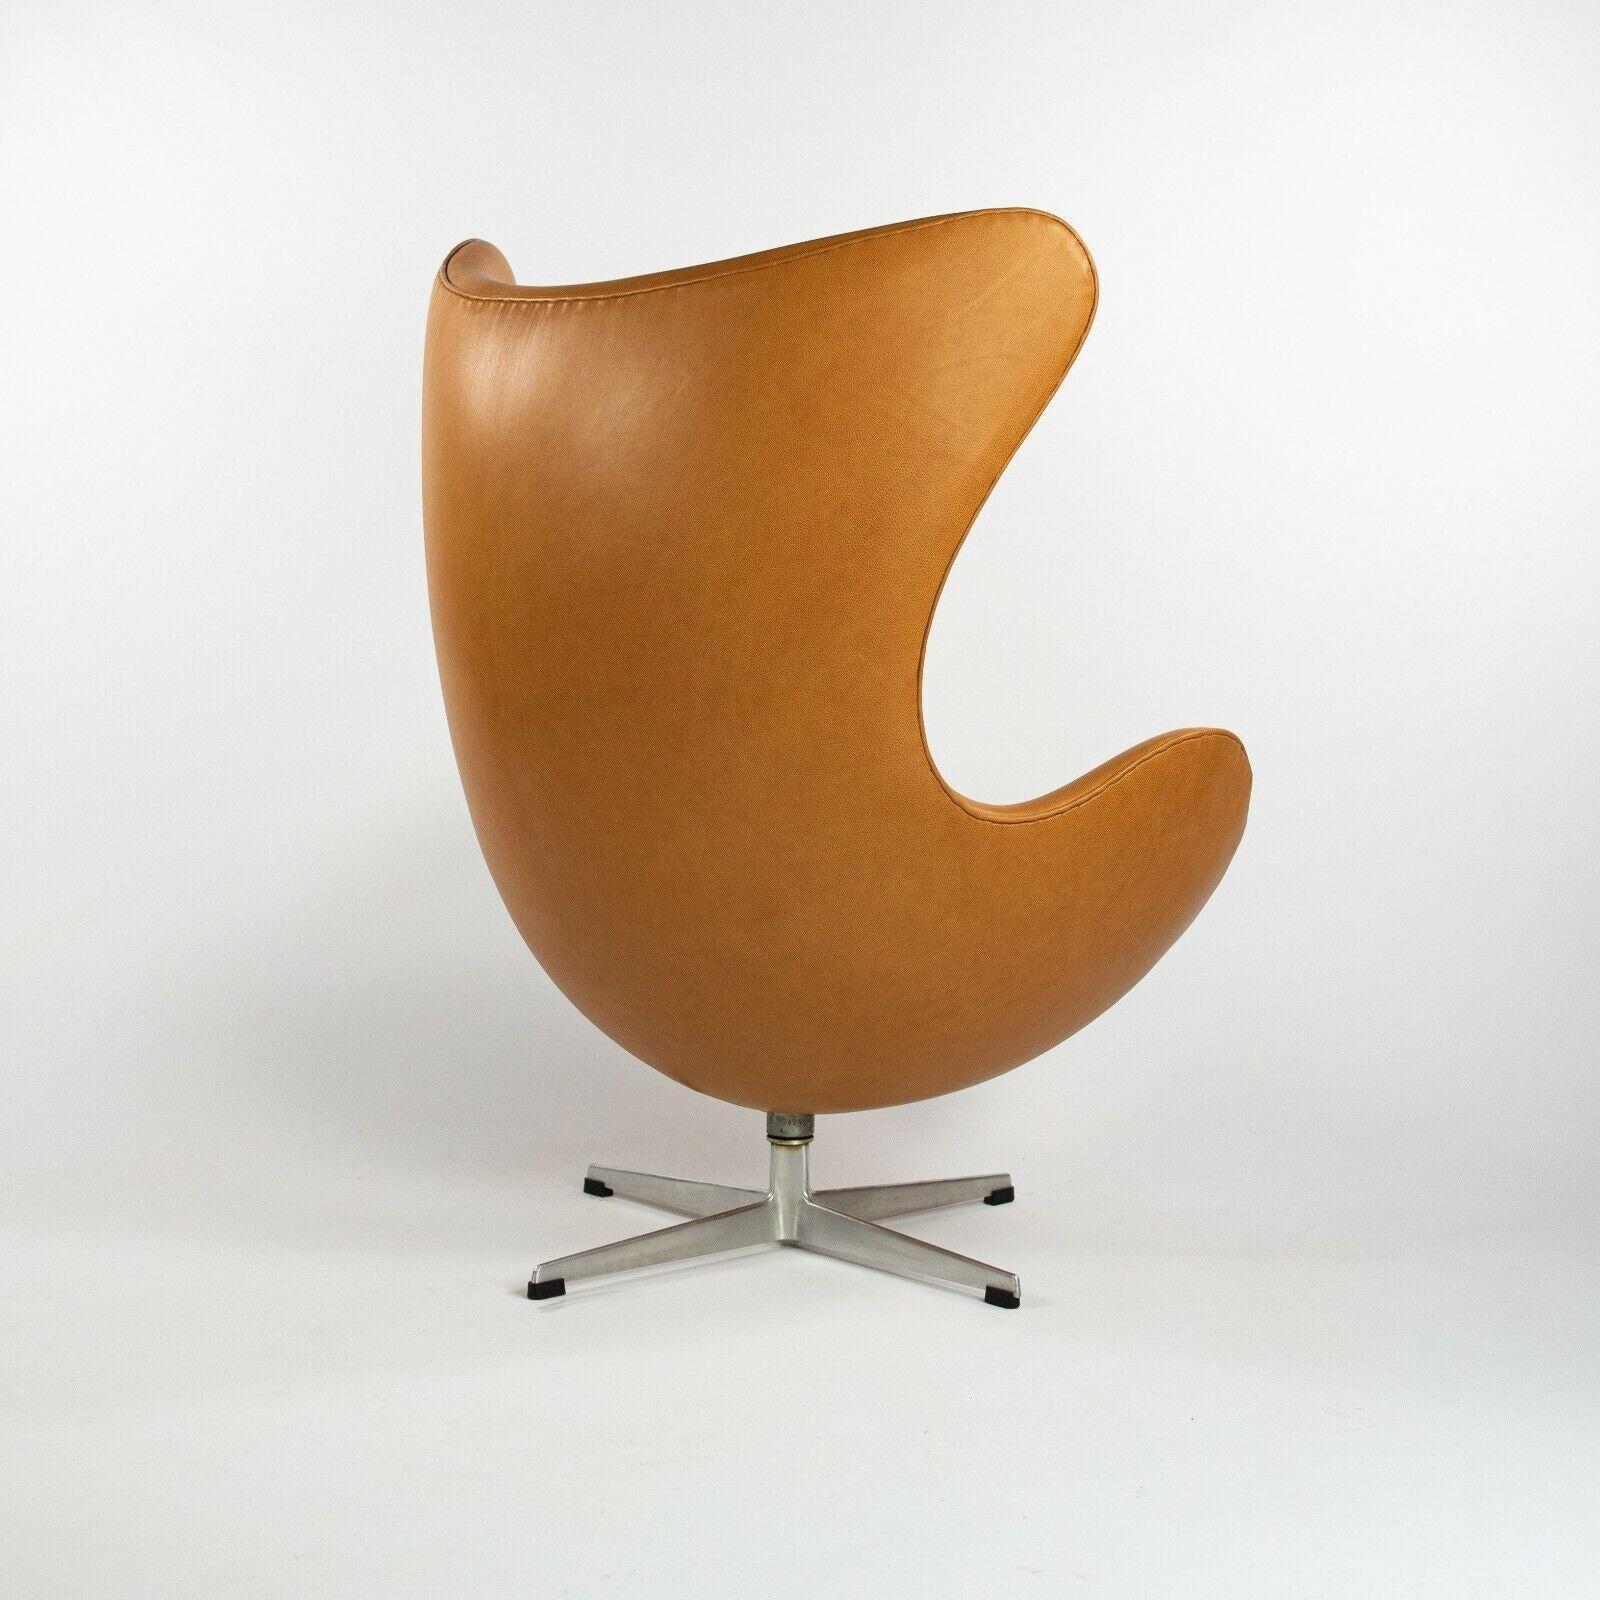 Hand-Crafted 1959 Arne Jacobsen for Fritz Hansen Egg Chair & Ottoman in Tan / Cognac Leather For Sale